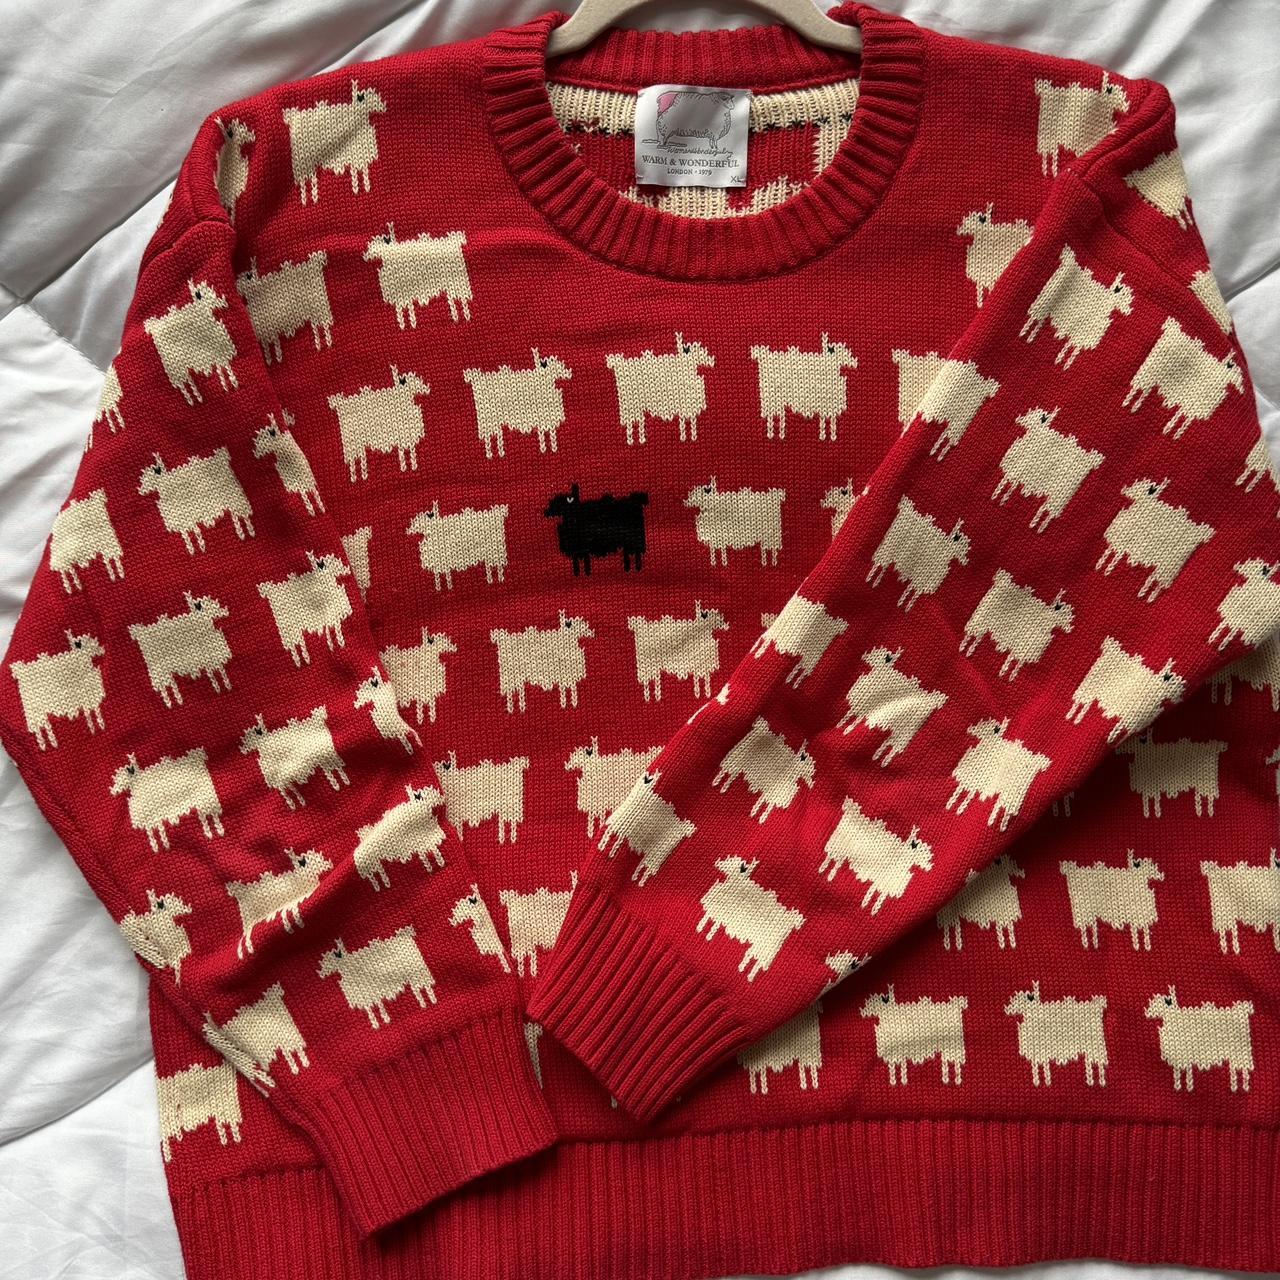 Warm & Wonderful Women's Fitted Diana Edition Cotton Sheep Sweater